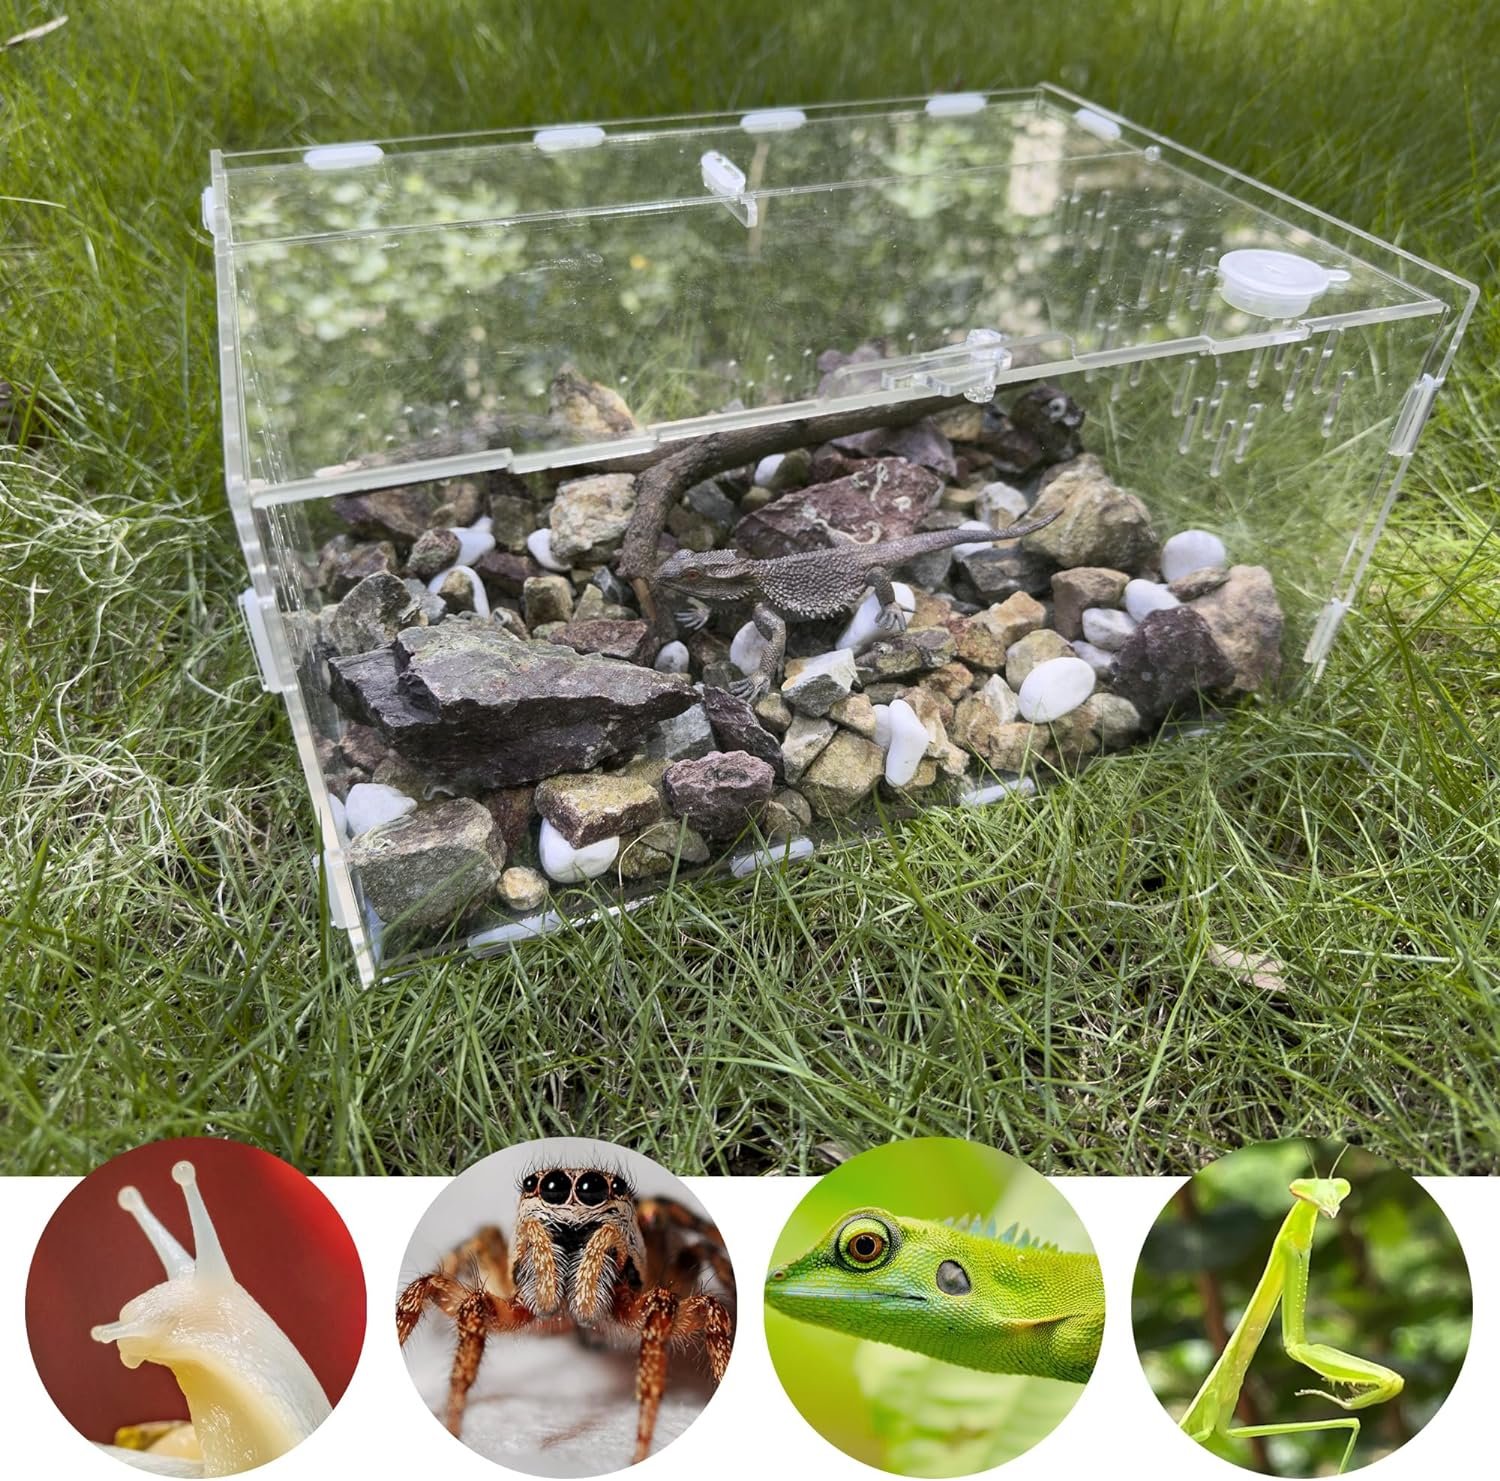 Acrylic Jumping Spider Tarantula Enclosure: 11.8x7.8x5.9 Reptile Tank for Insect Small Tree Dwelling Reptiles - Habitat Terrarium Breeding Box for Crickets Snails Hermit Crabs Lizards Frogs Mantis